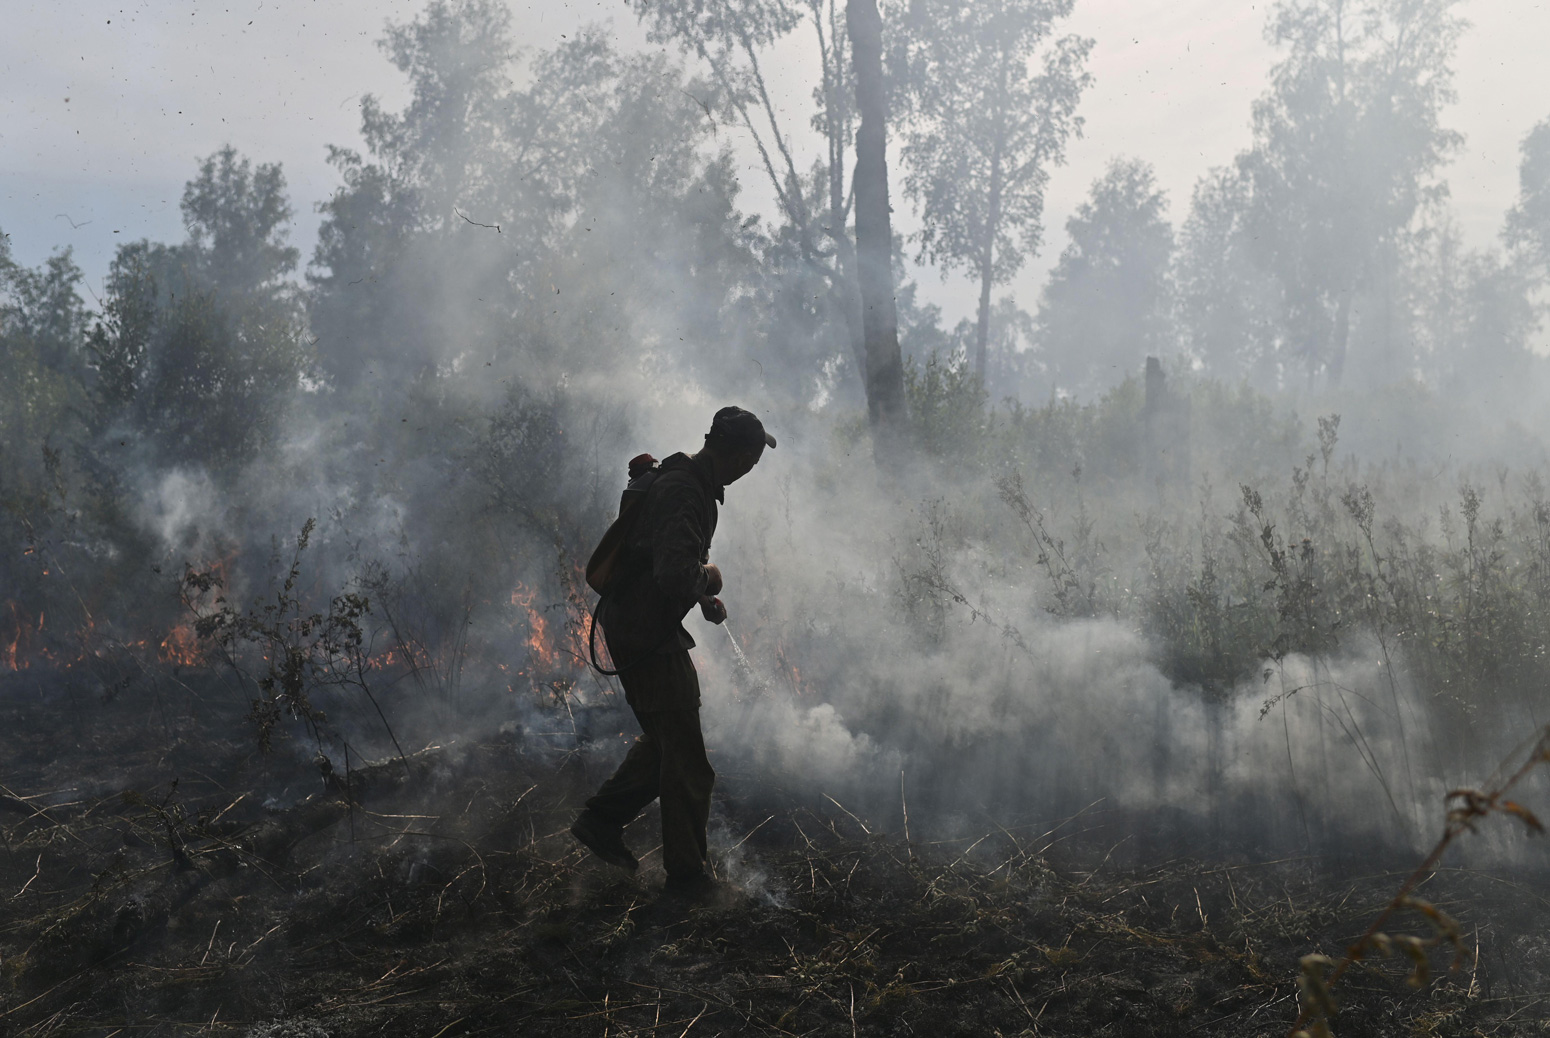 Russian Federal Agency for Forestry works to put out a forest fire in Basly, Russia in August 2020